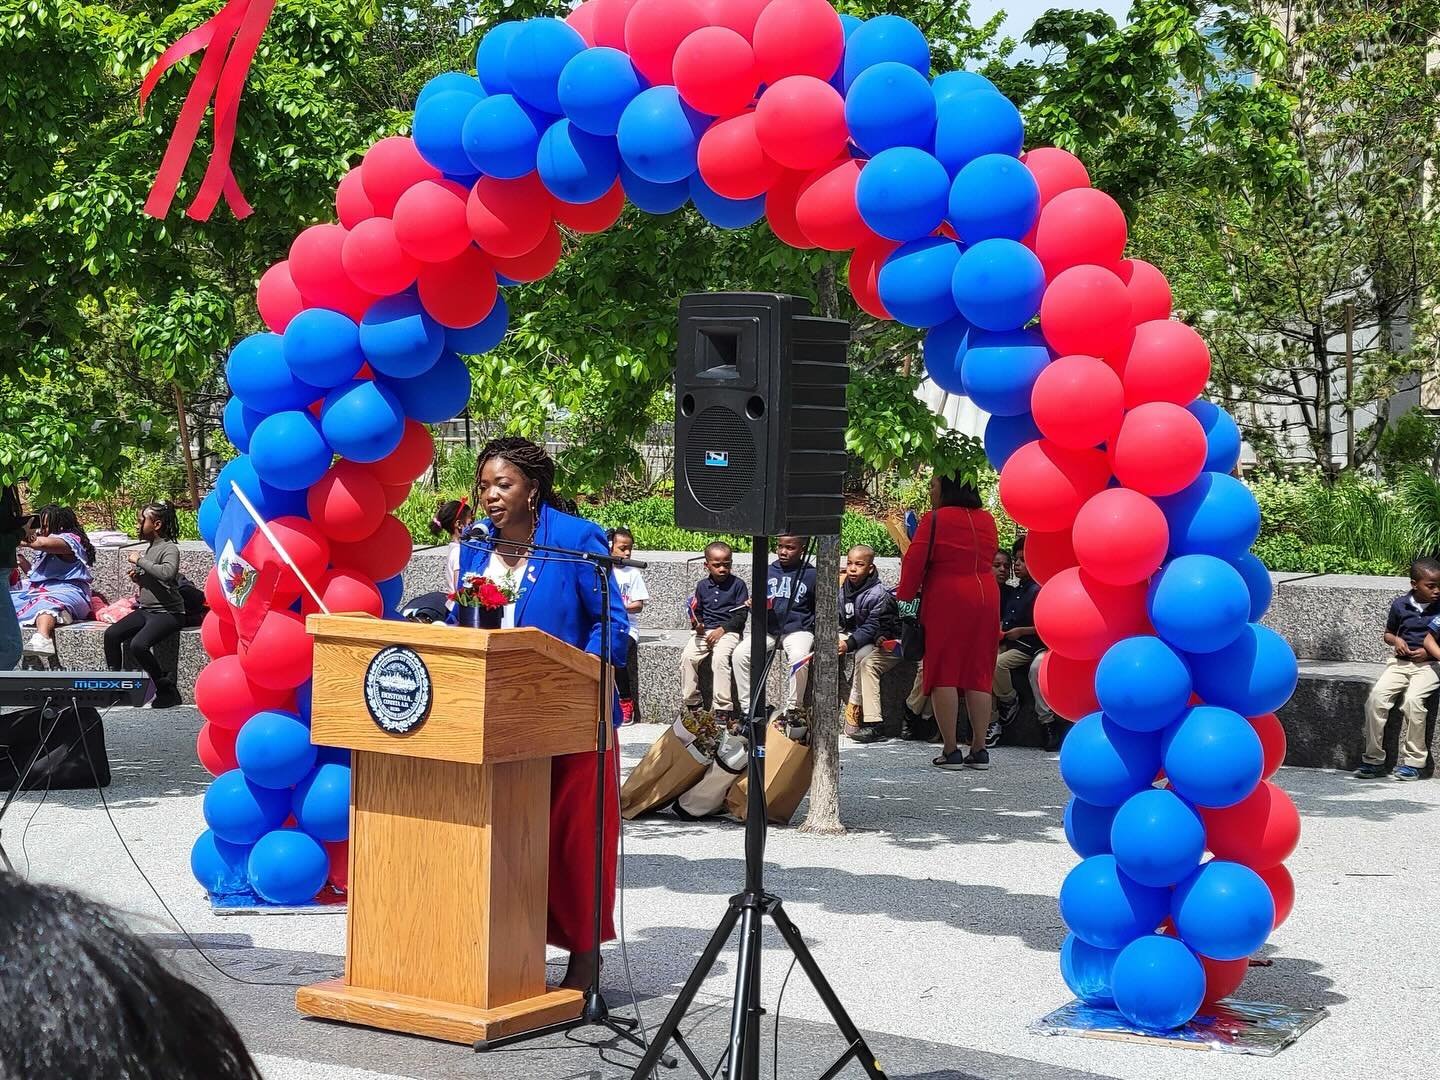 Thank you to City Council President Louijeune for planning this morning&rsquo;s Haitian Flag Day breakfast and flag raising! It was a wonderful celebration showcasing the rich heritage and vibrant spirit of Haiti.

#haitianpride #haitianflagday #hait